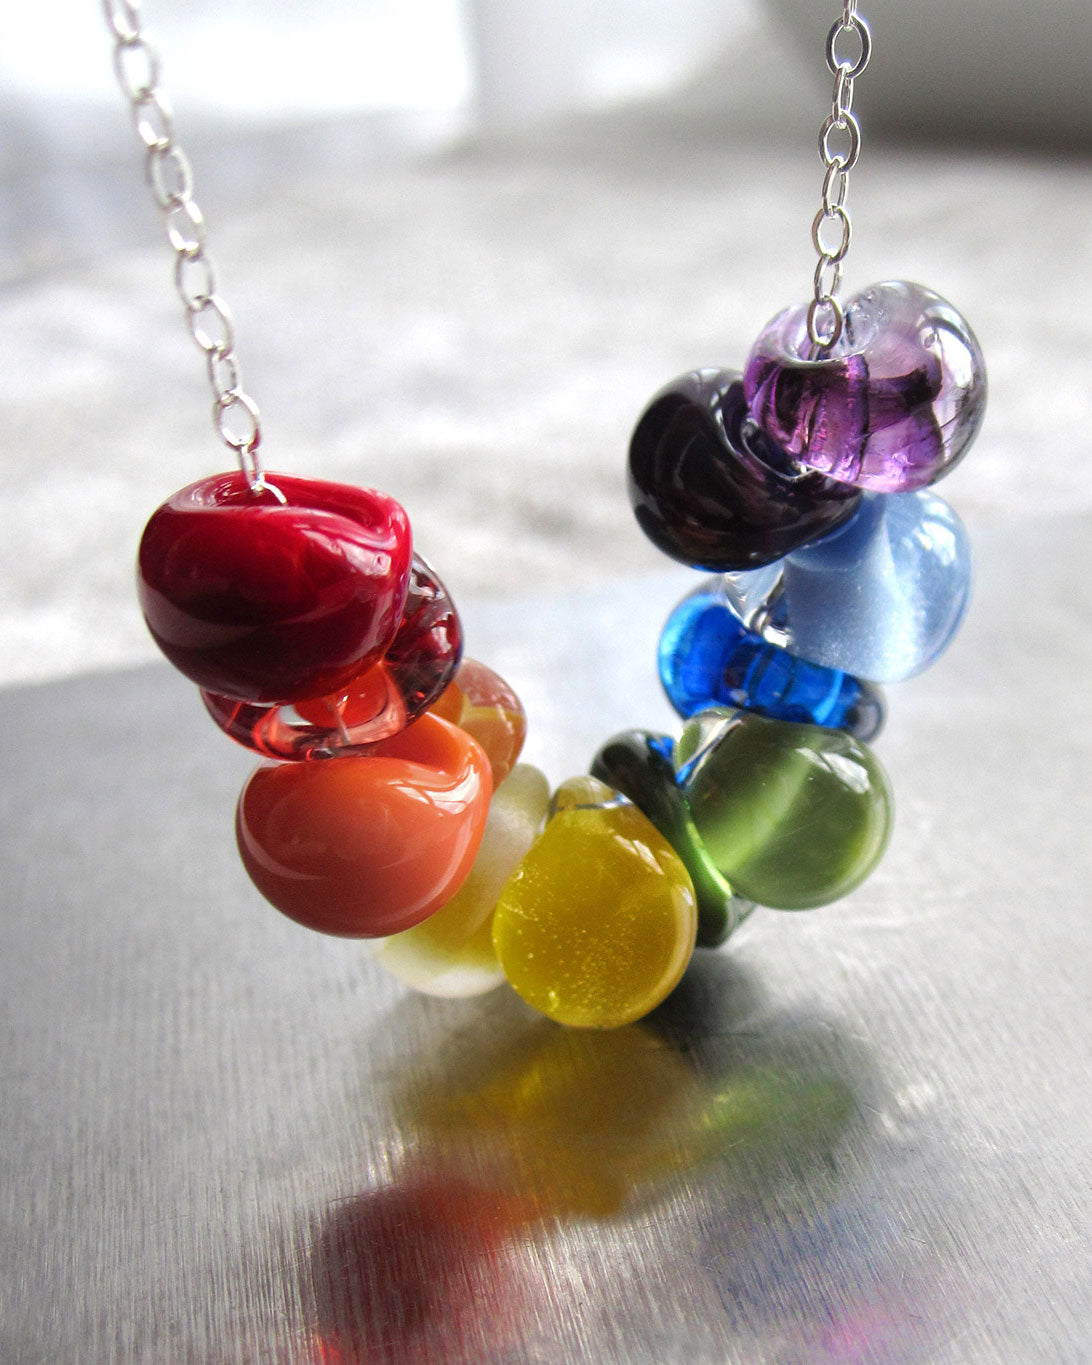 Rainbow Necklace - $20 Donation to Time Out Youth